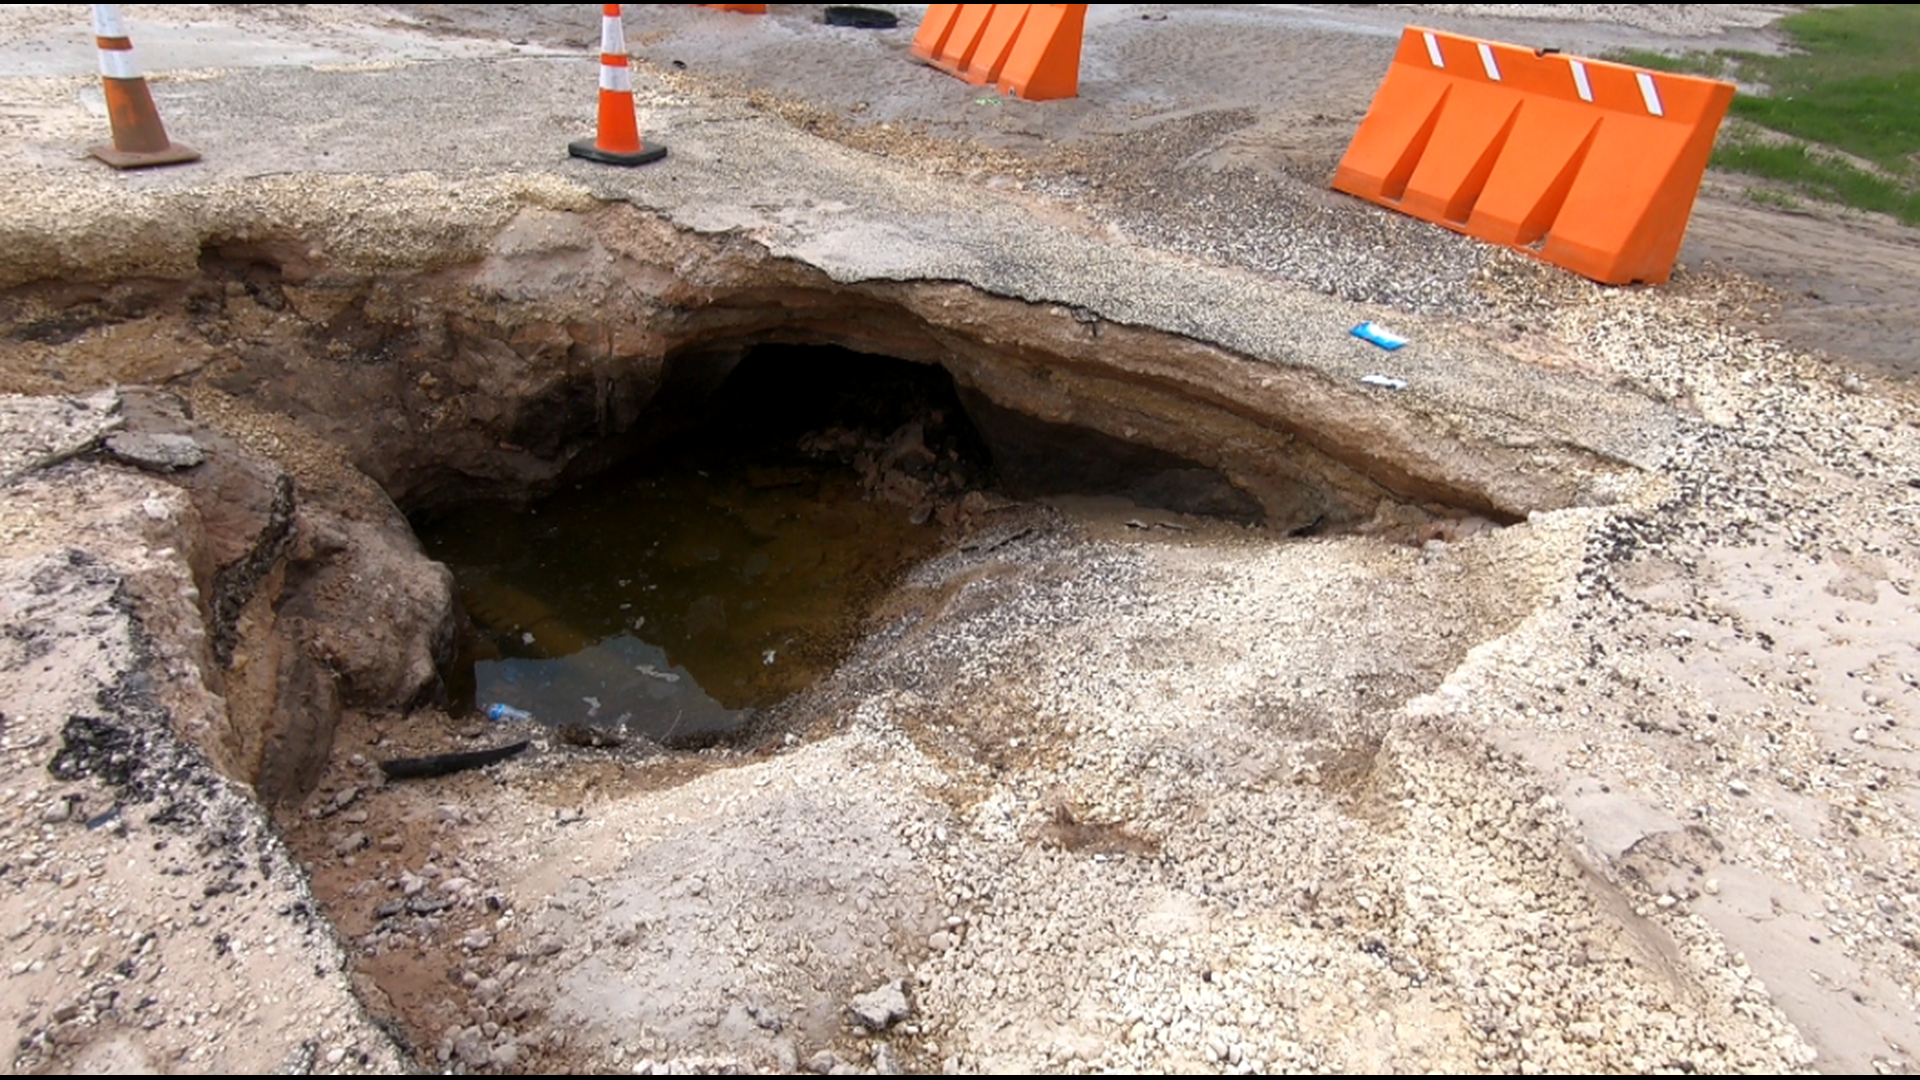 “There are holes like this all over town," Michele Meyers, Big Spring resident, said.